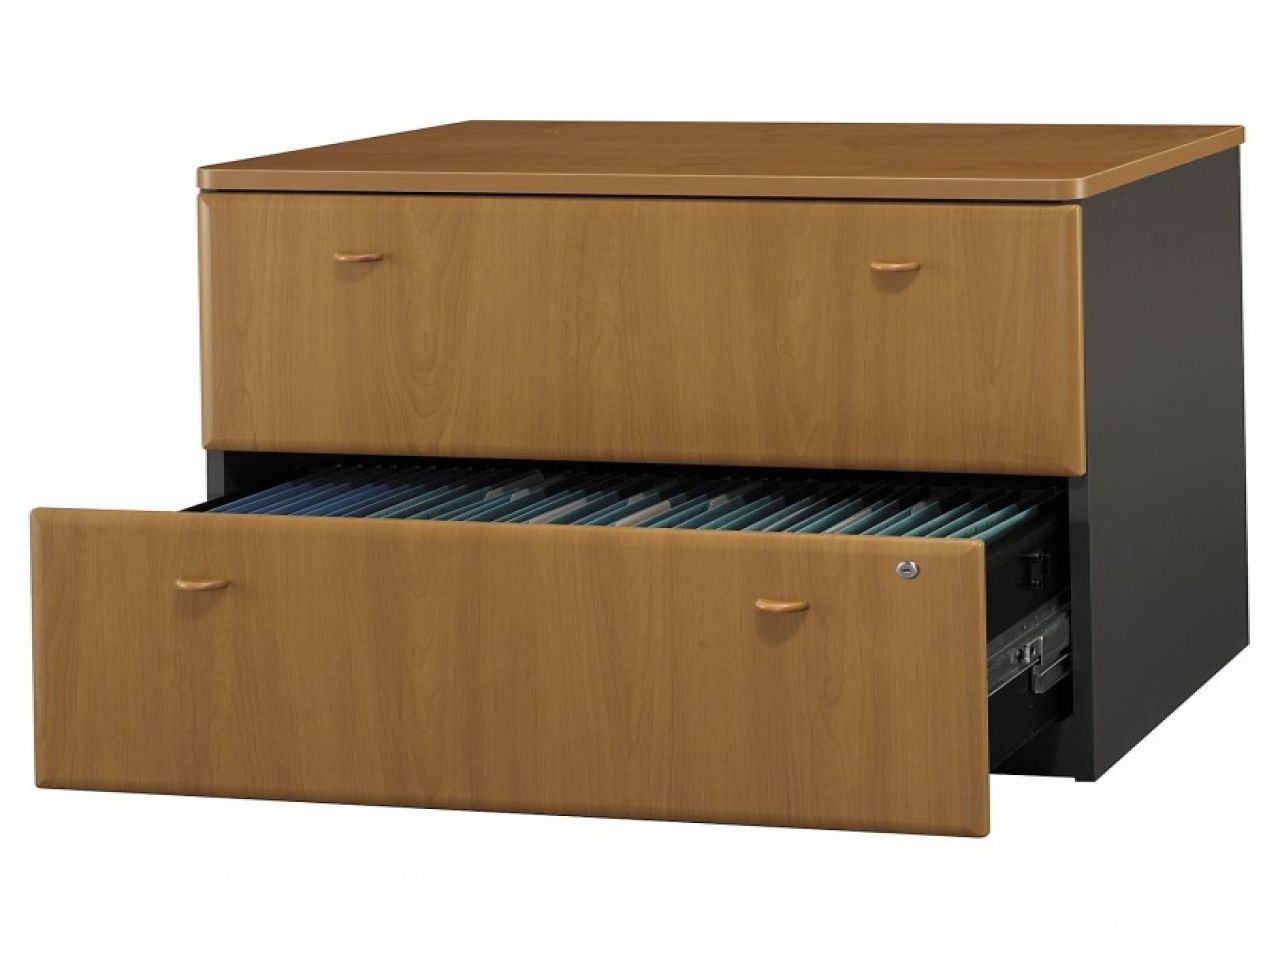 File Cabinet Rails Of Cutlery Home Design Fuller Fireking Lateral inside proportions 1280 X 960